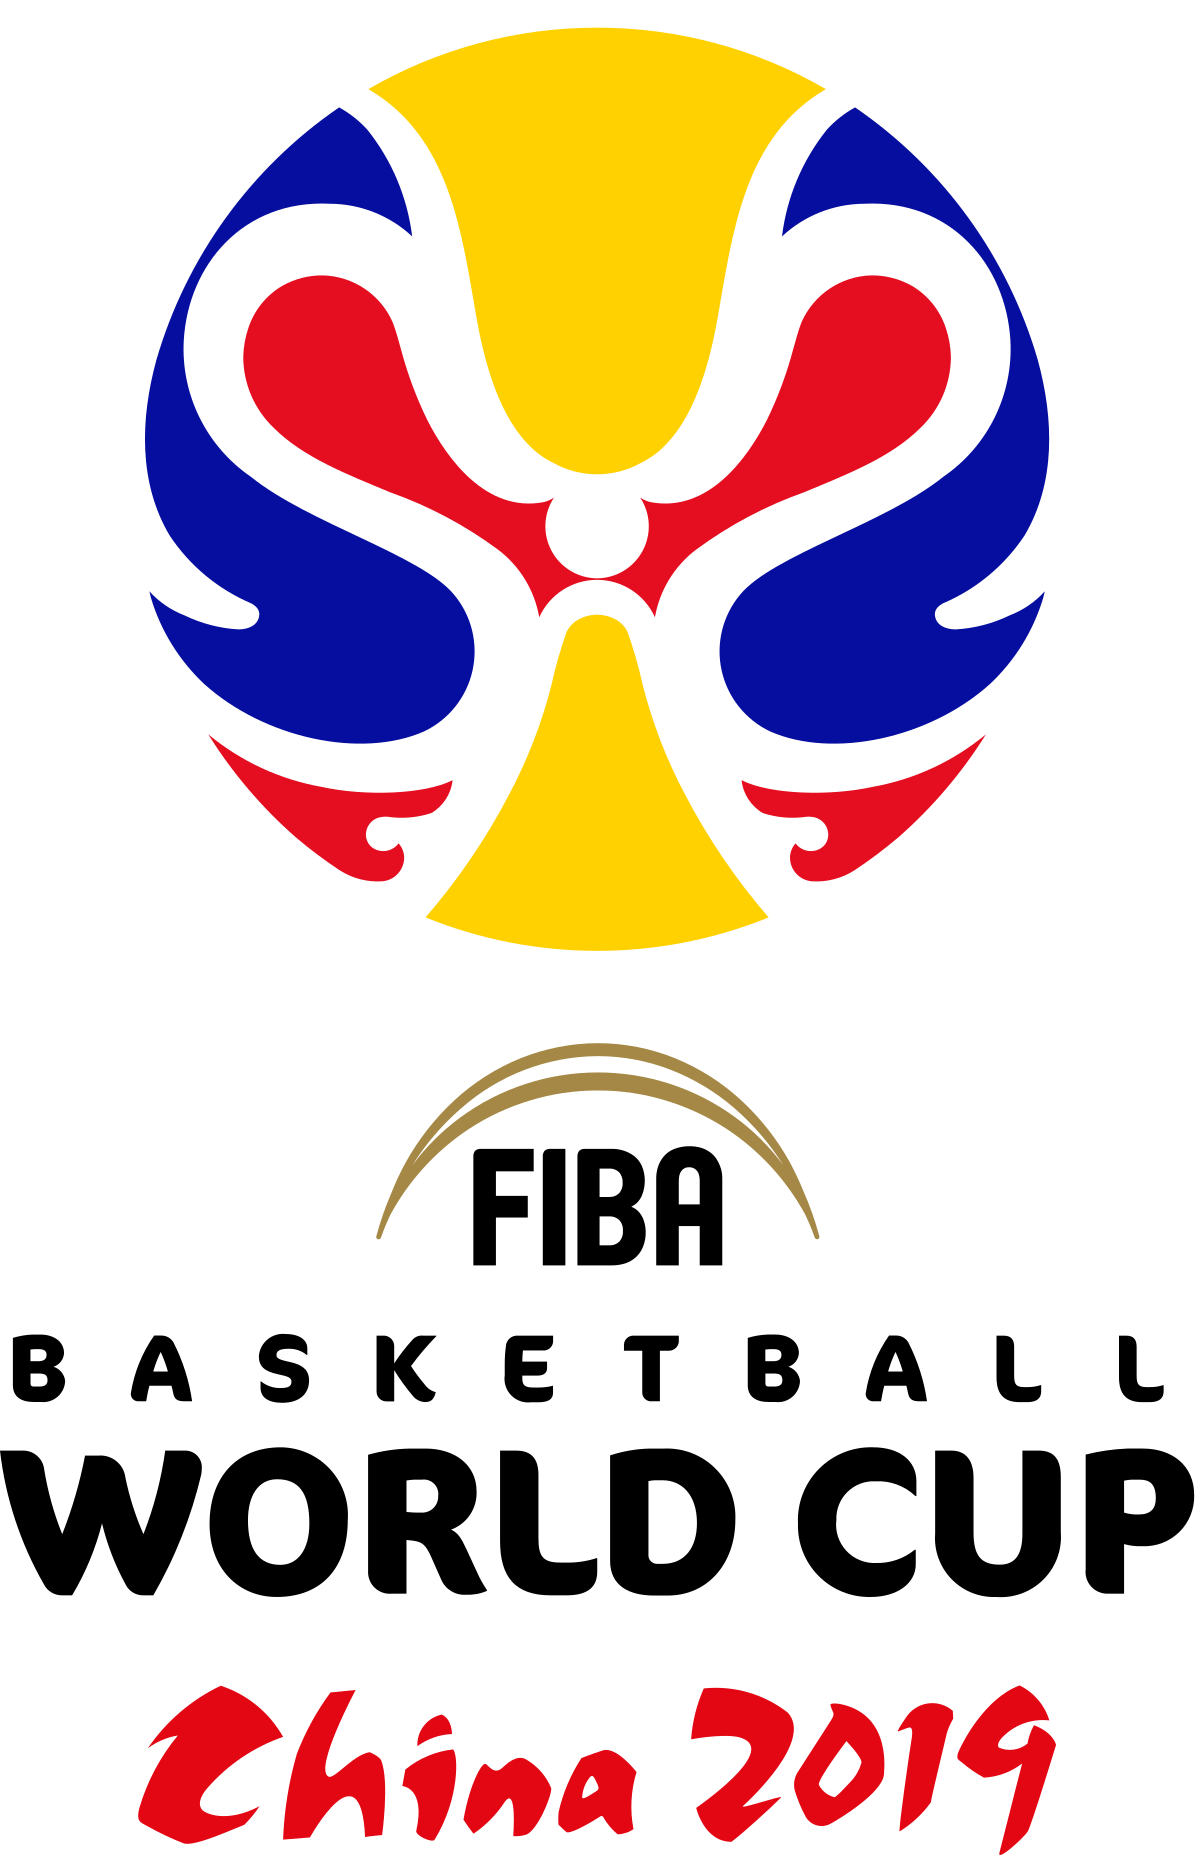 The 2019 FIBA Basketball World Cup Was Hosted By Which Asian Country